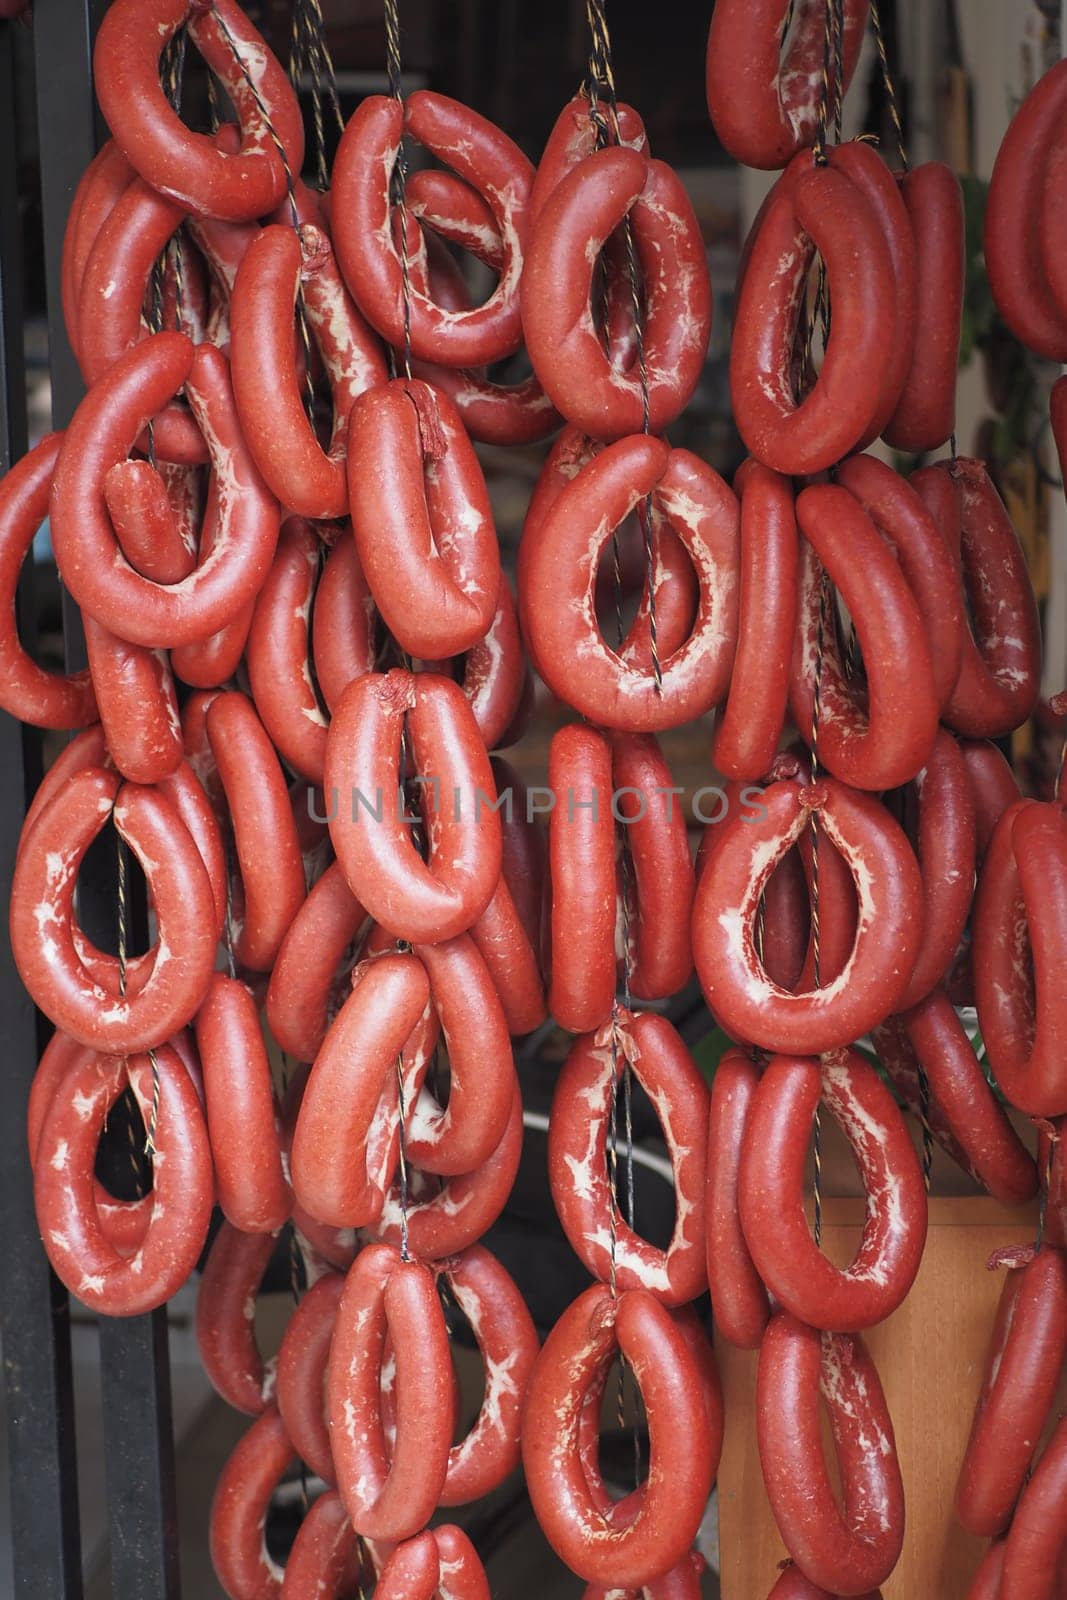 Sausage in turkish culture in a market by towfiq007